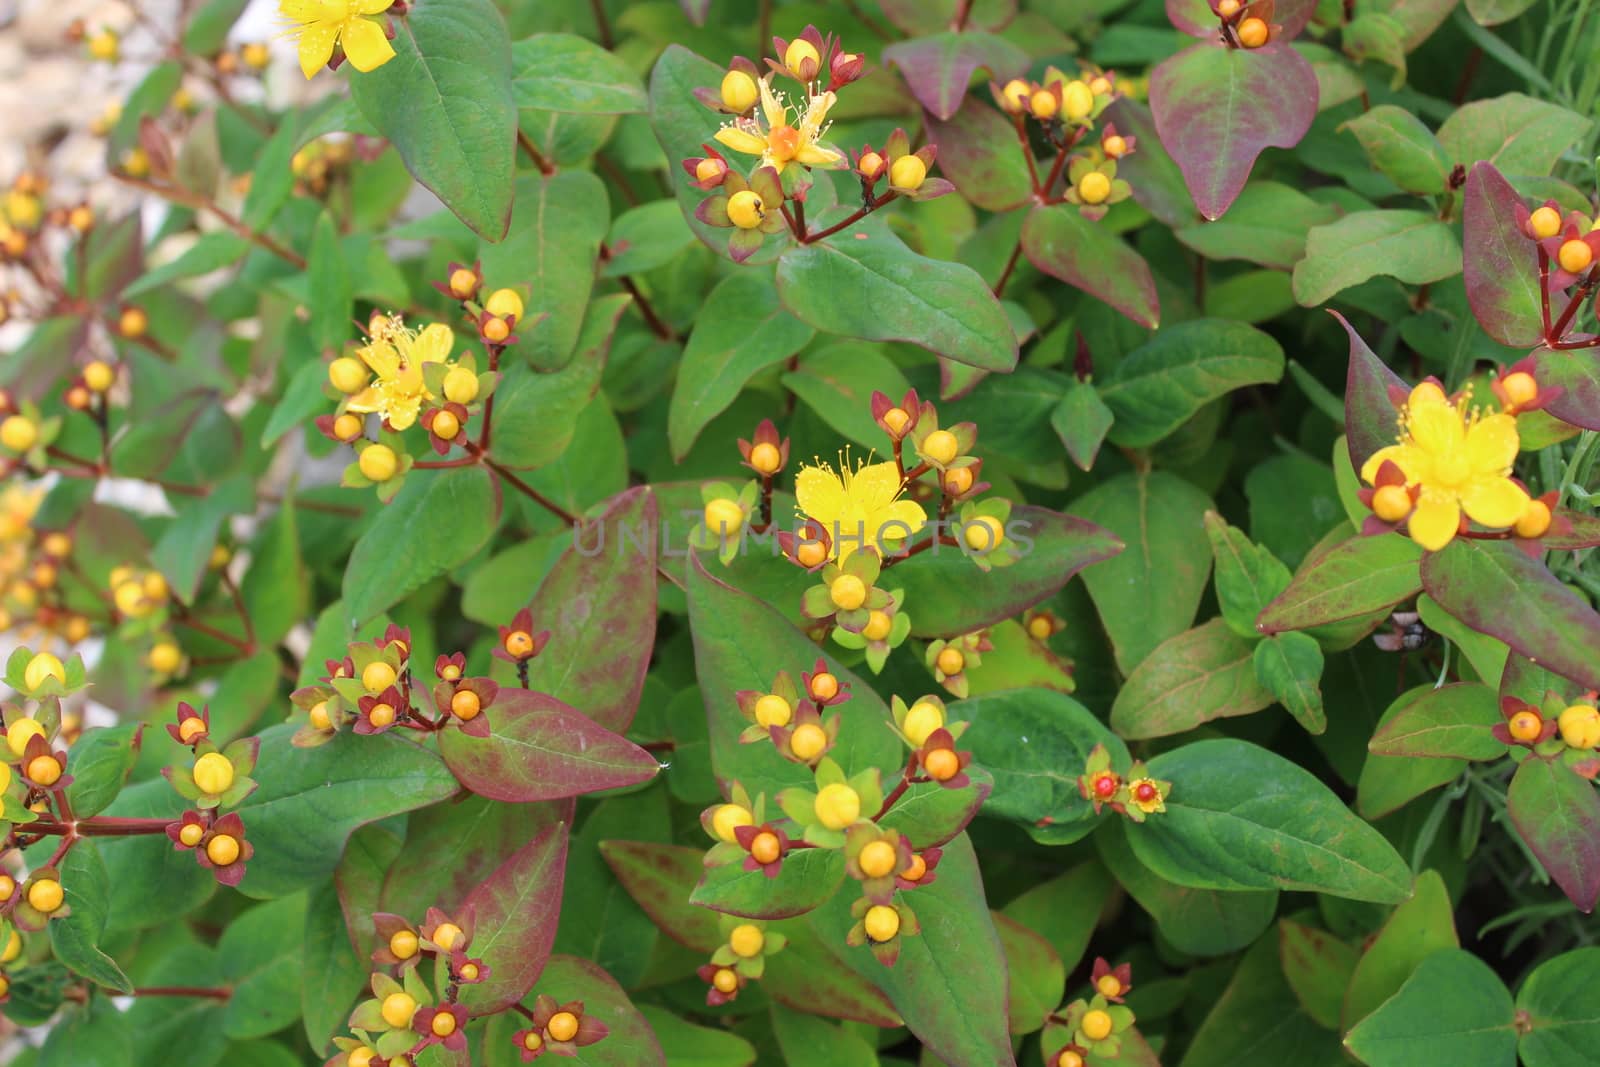 The picture shows blossoming tutsan in the garden